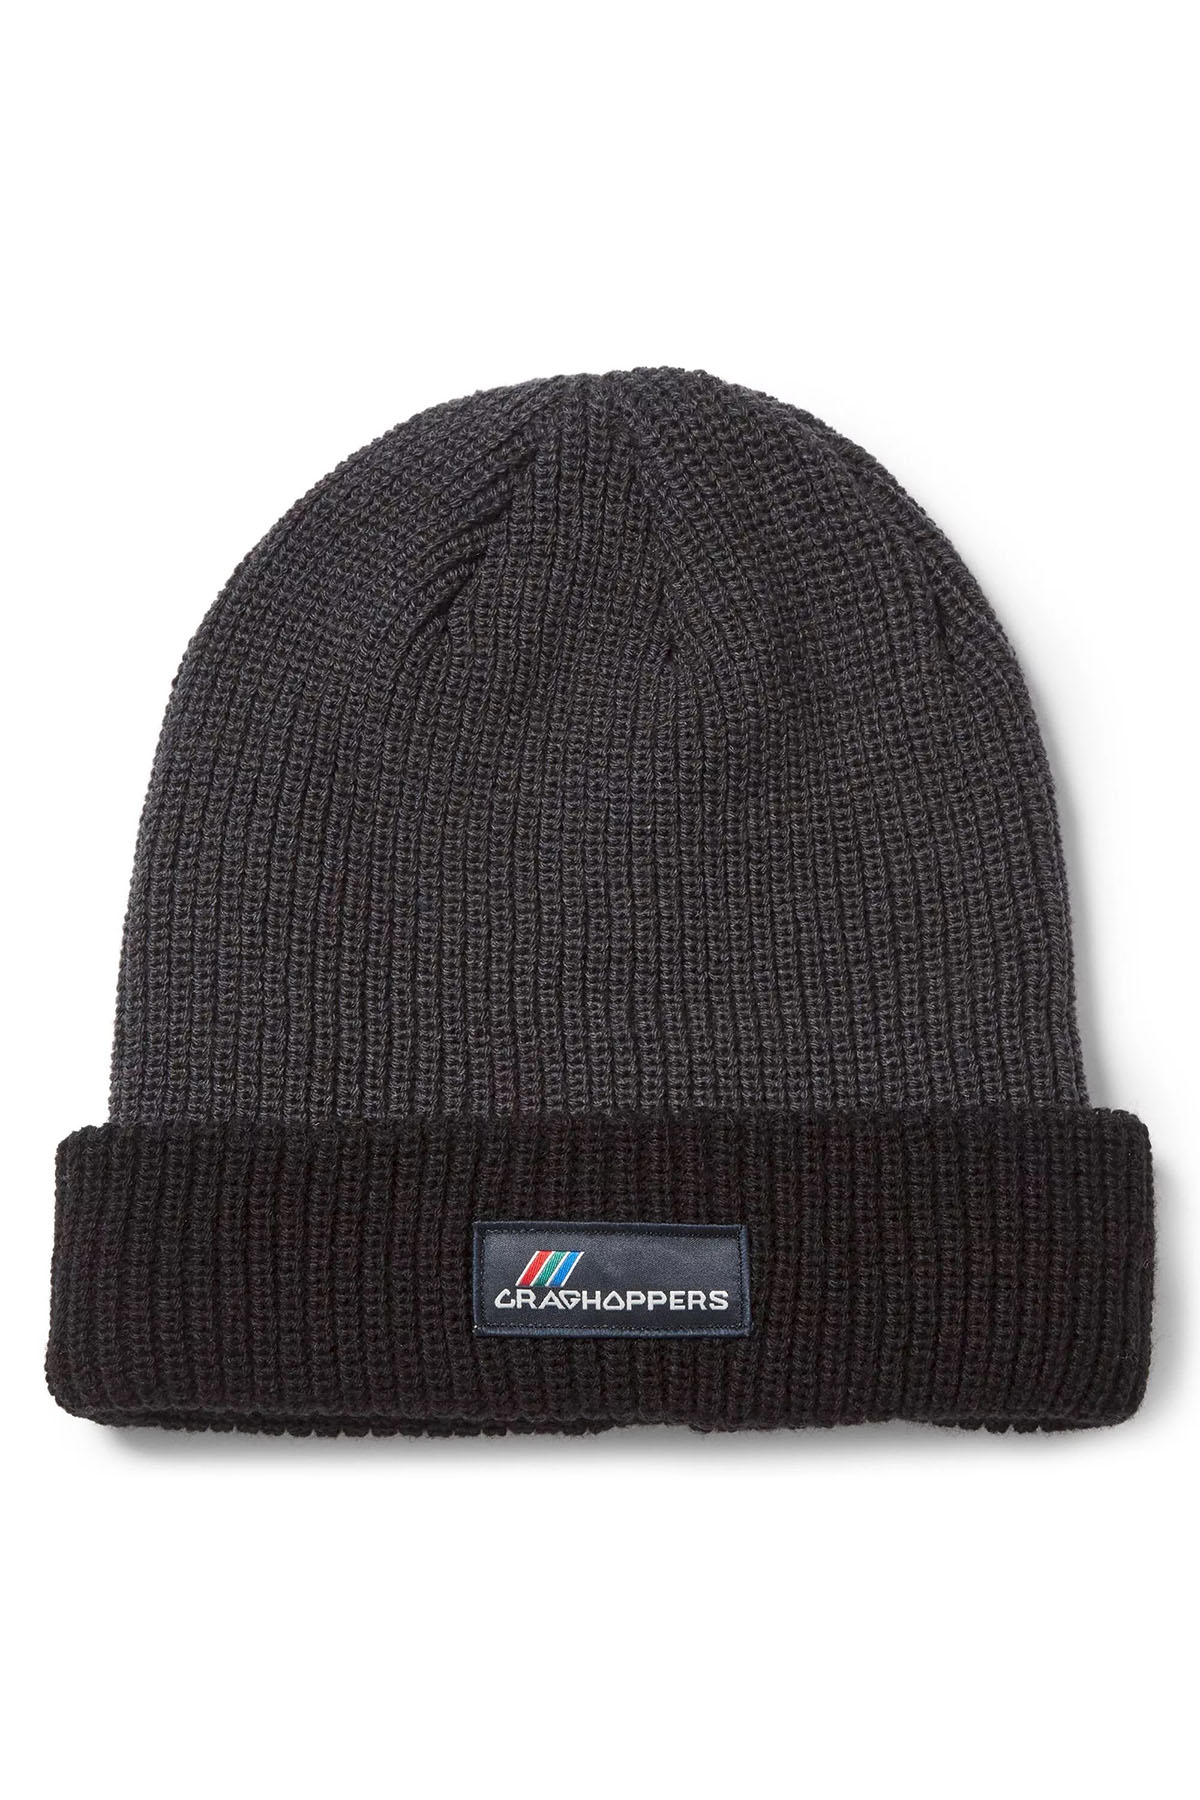 Craghoppers Archive Beanie Siyah Bere